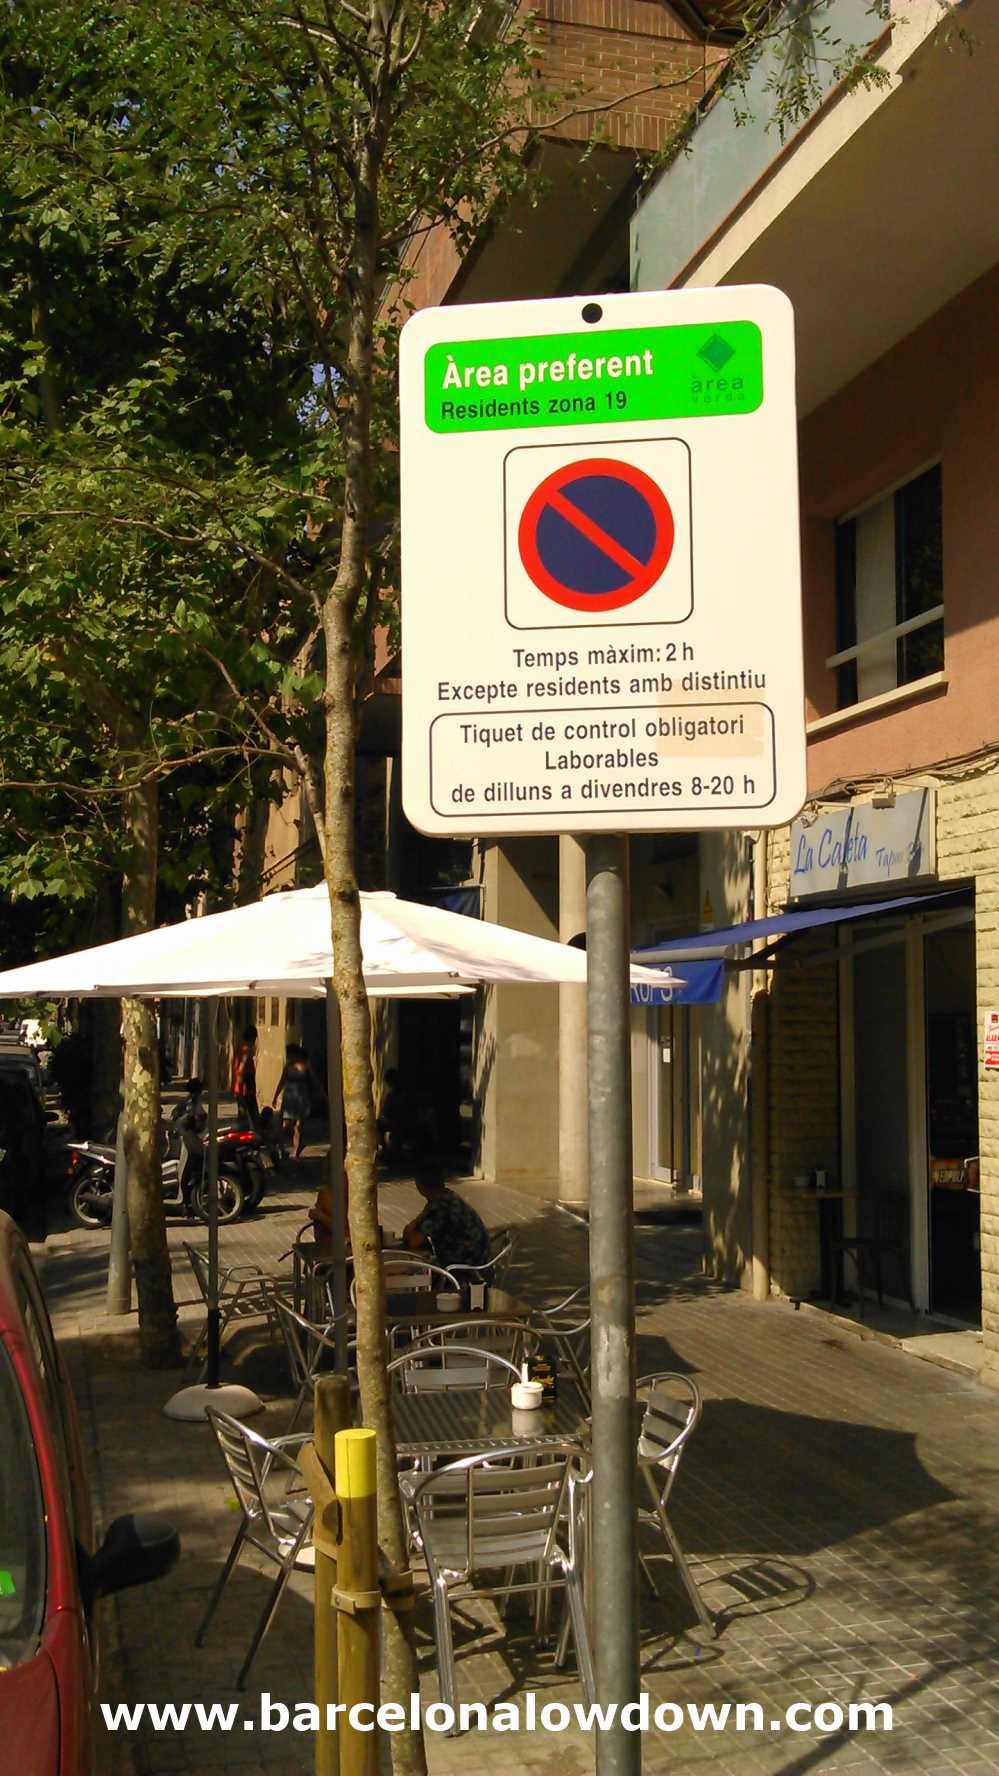 Resident parking sign in the Poblenou neighbourhood of Barcelona. This area allows free parking in August.